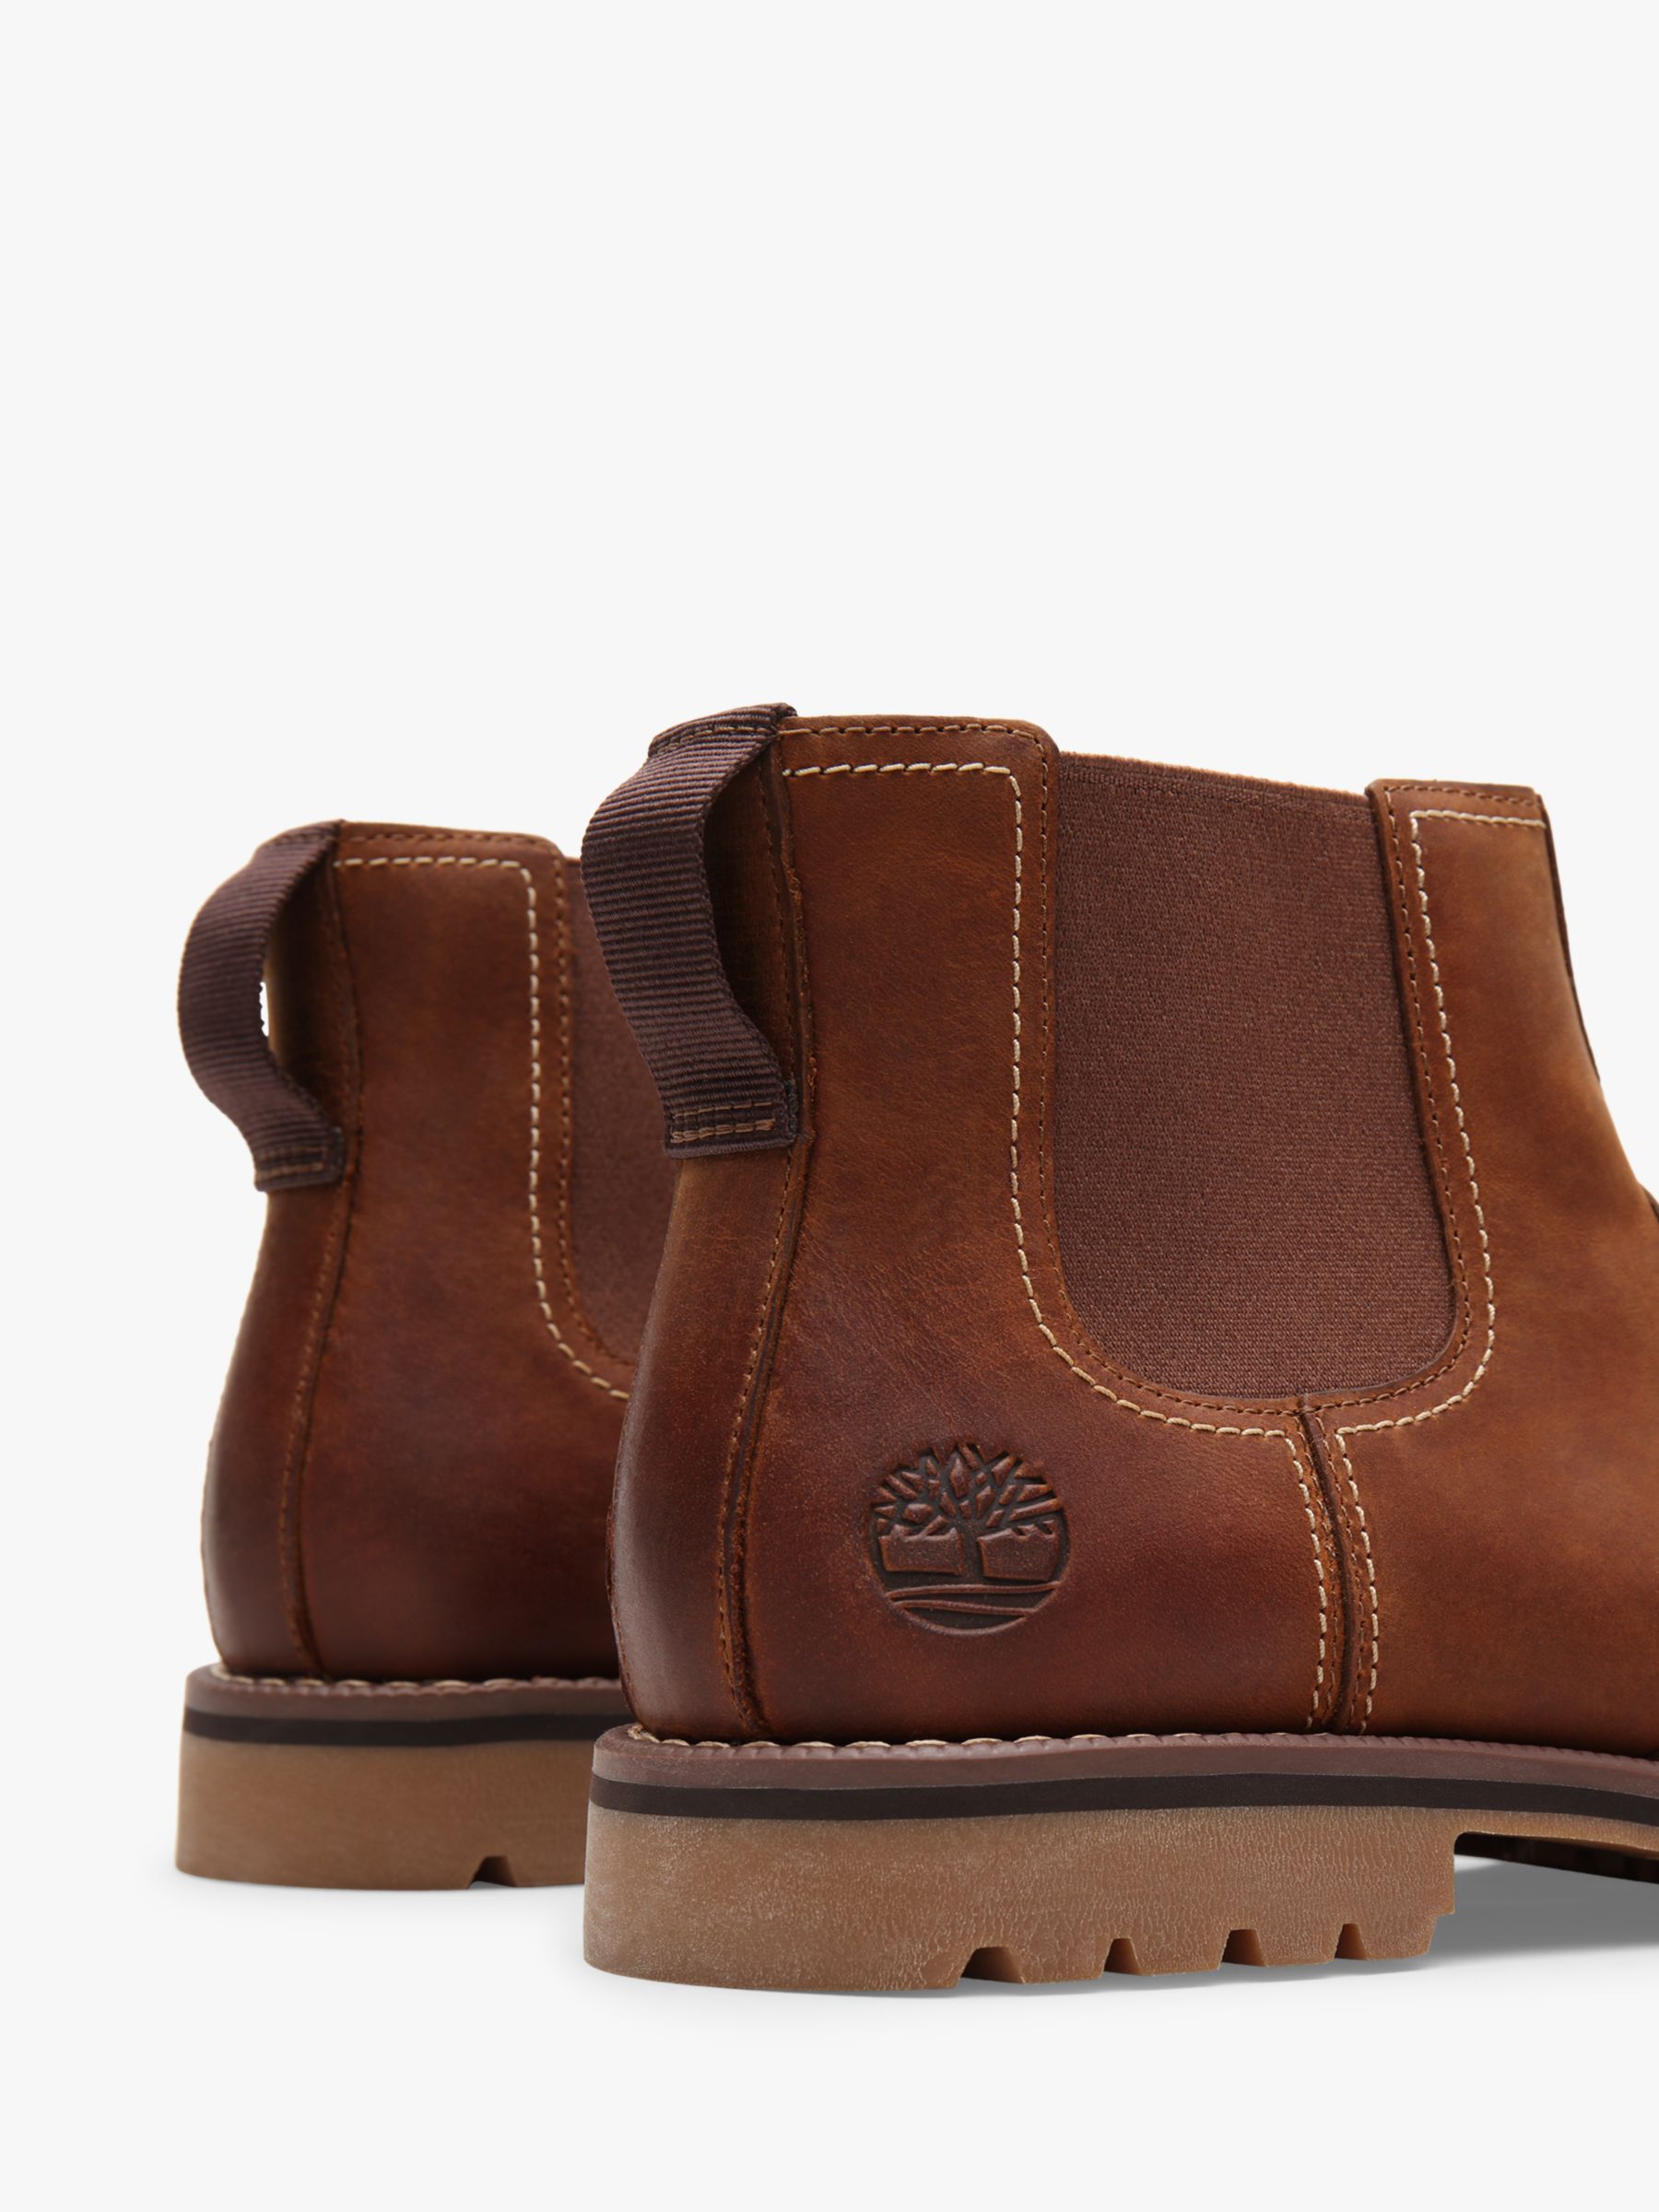 larchmont chelsea boot timberland